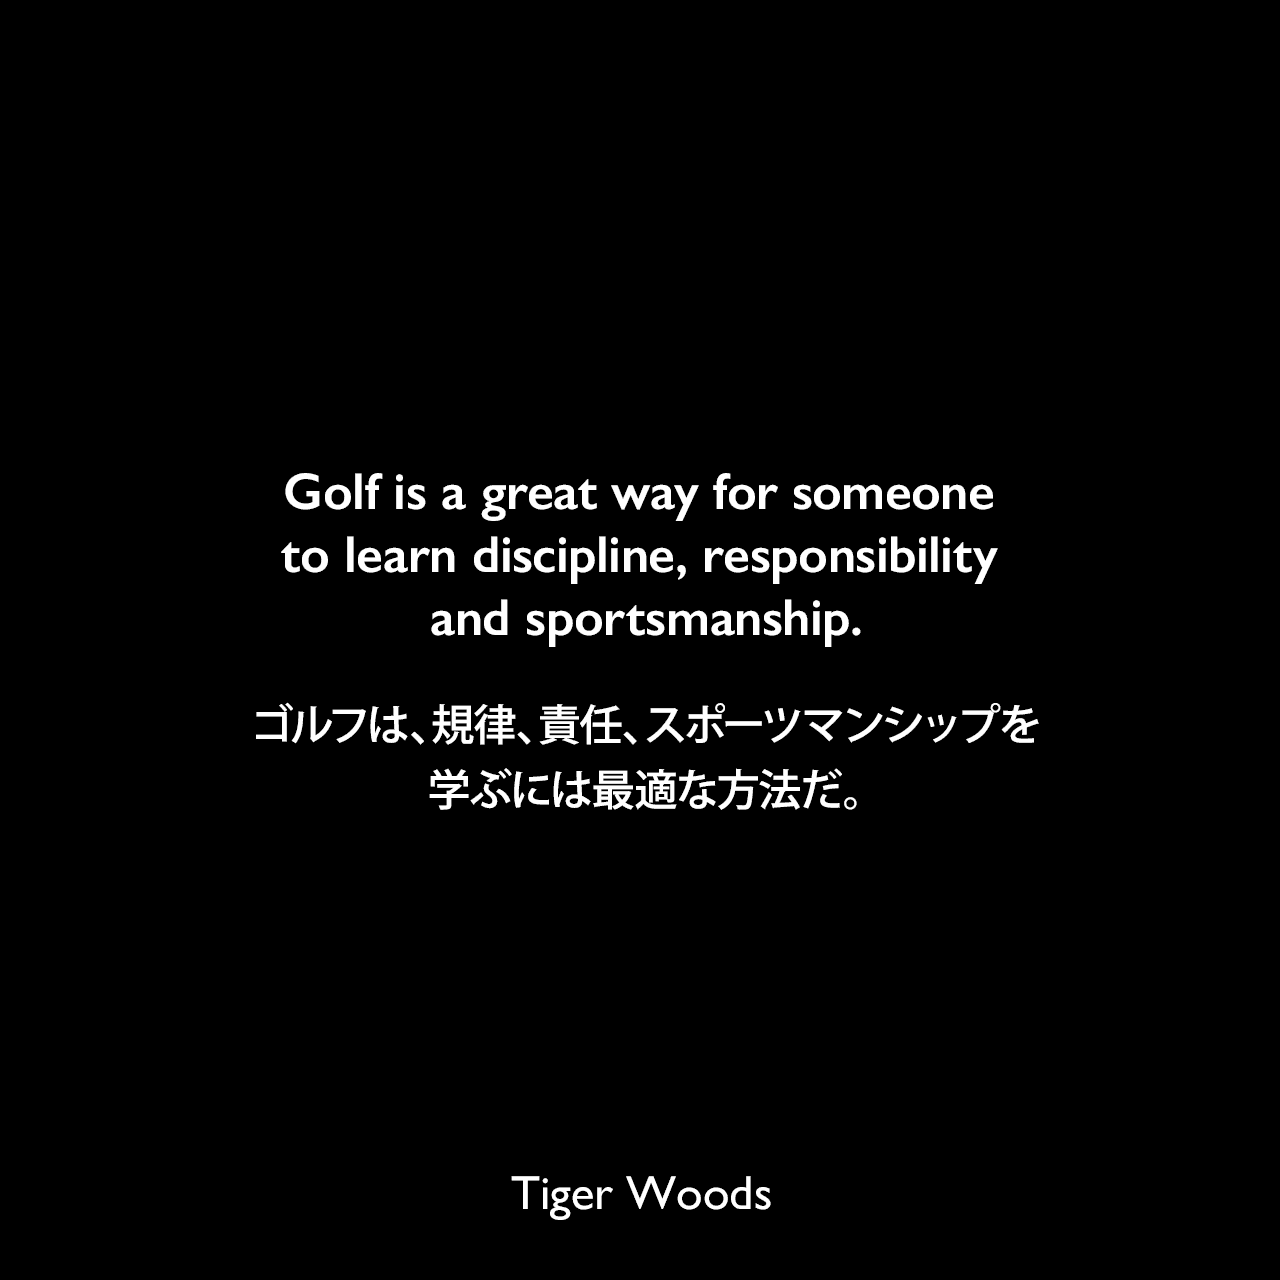 Golf is a great way for someone to learn discipline, responsibility and sportsmanship.ゴルフは、規律、責任、スポーツマンシップを学ぶには最適な方法だ。Tiger Woods